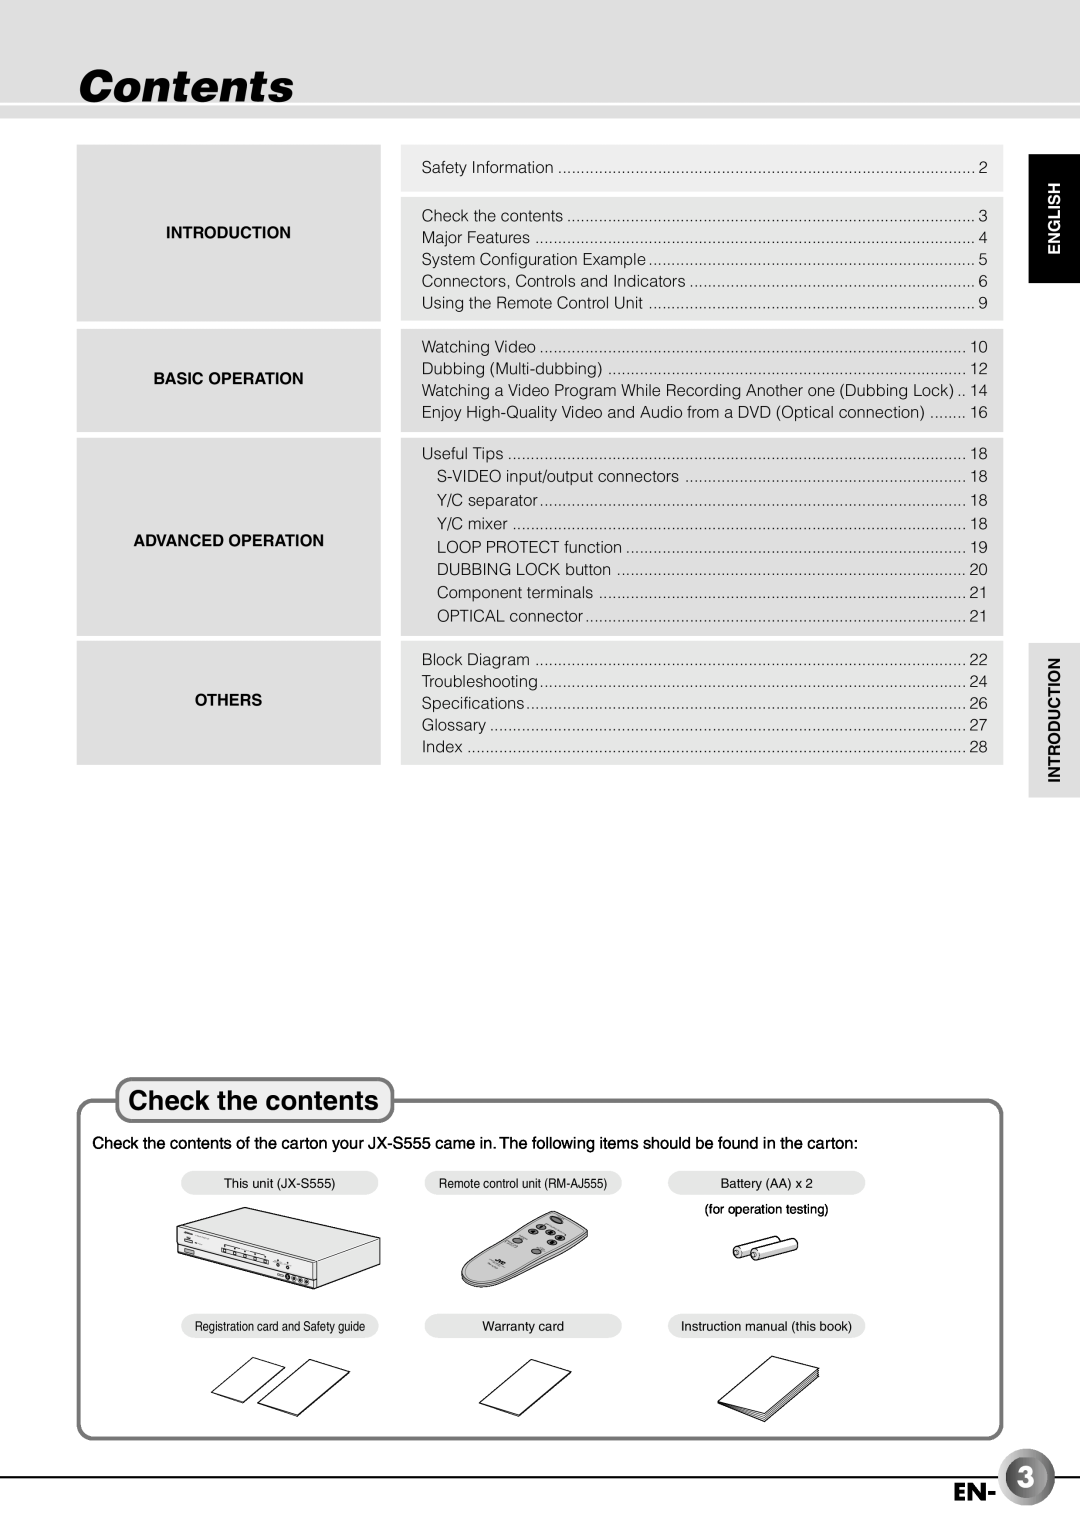 JVC JX-B555 manual Contents, Check the contents, Introduction Basic Operation Advanced Operation, Others, English, Digital 